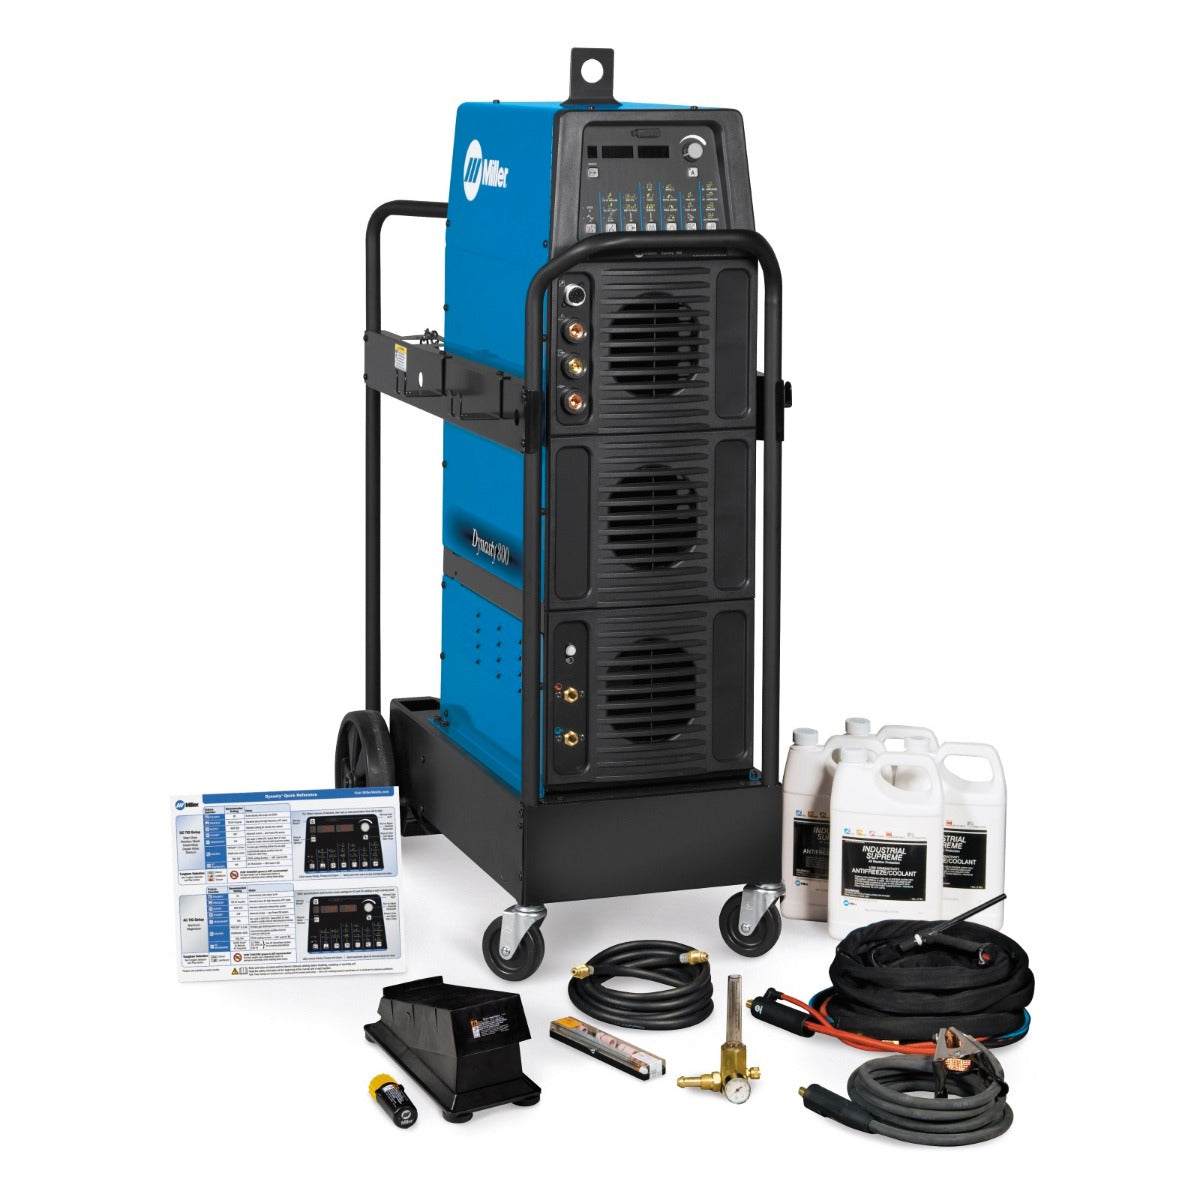 Miller Dynasty 800 TIG Welder and Water-Cooled Package with Wireless Foot Control (951697)